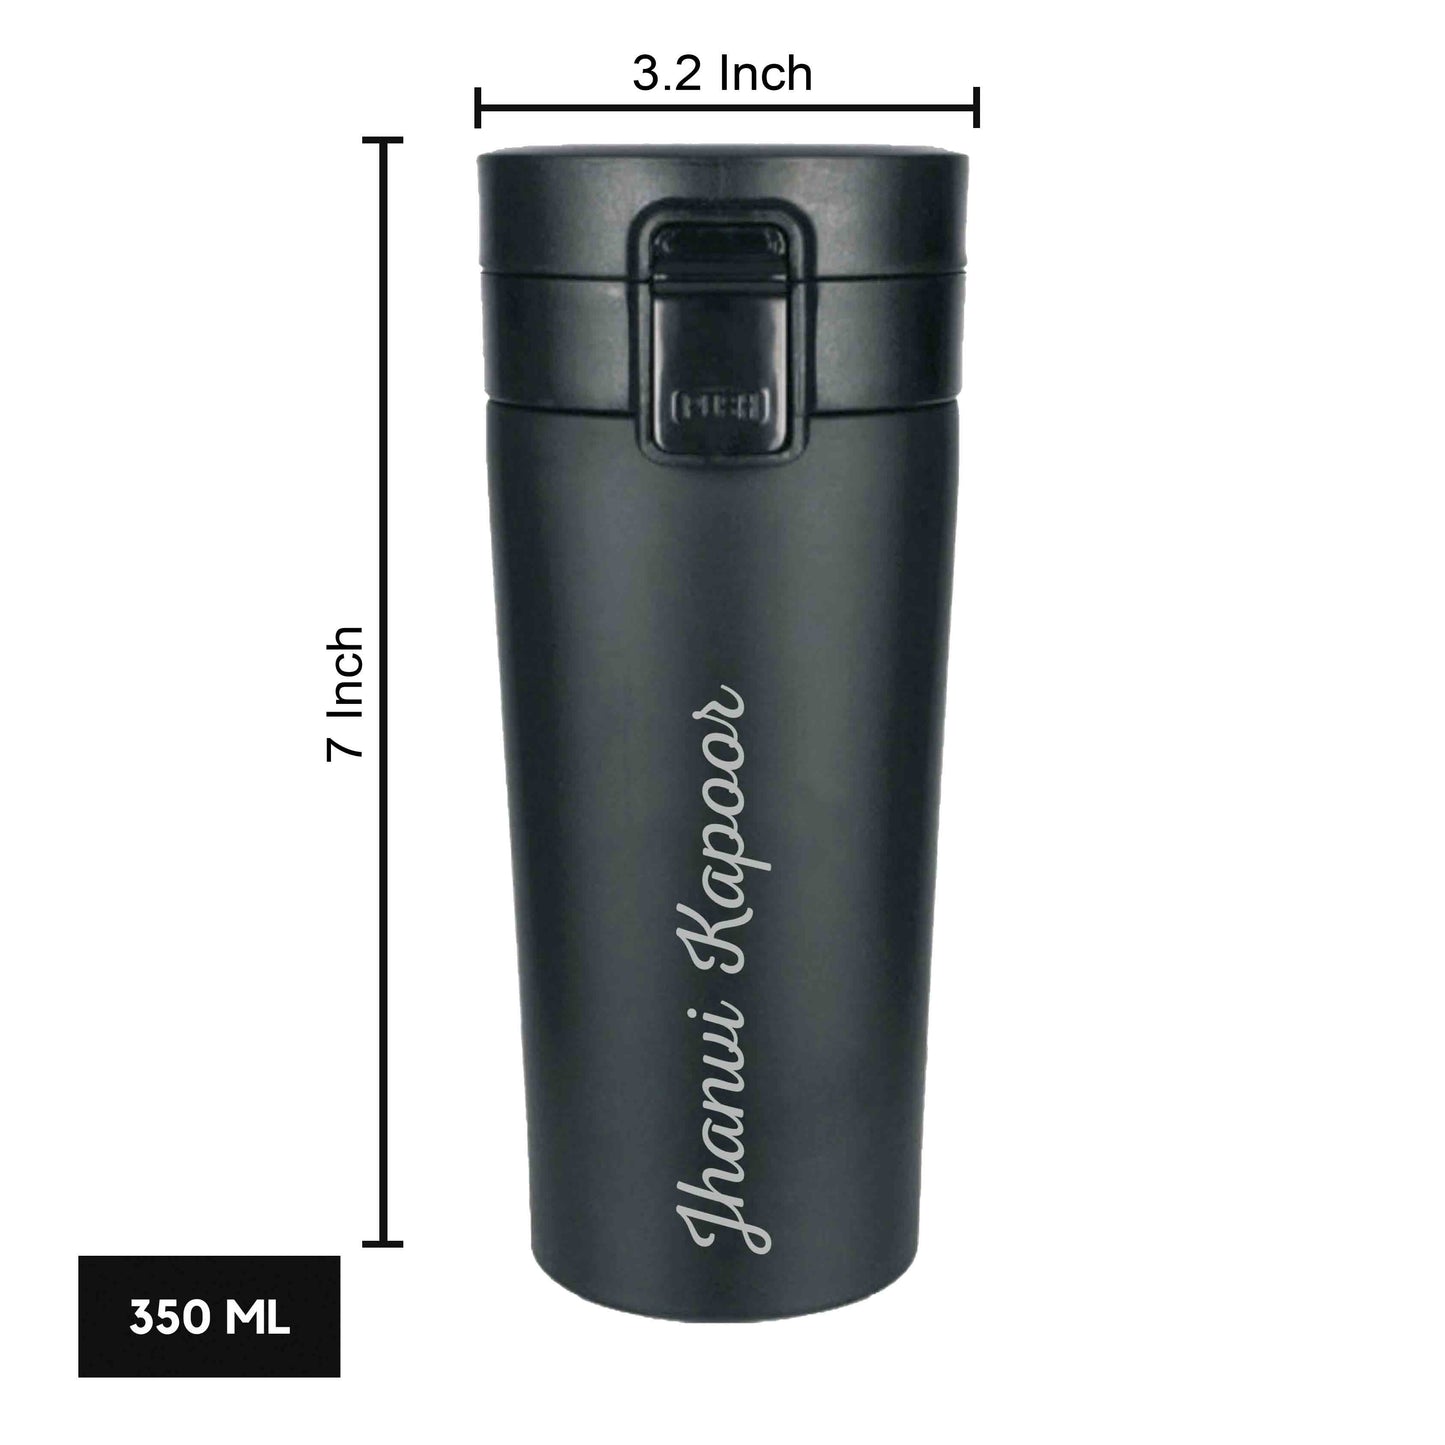 Engraved Personalized Stainless Steel Coffee Tumbler with Lid for Office Travel College - Add Name